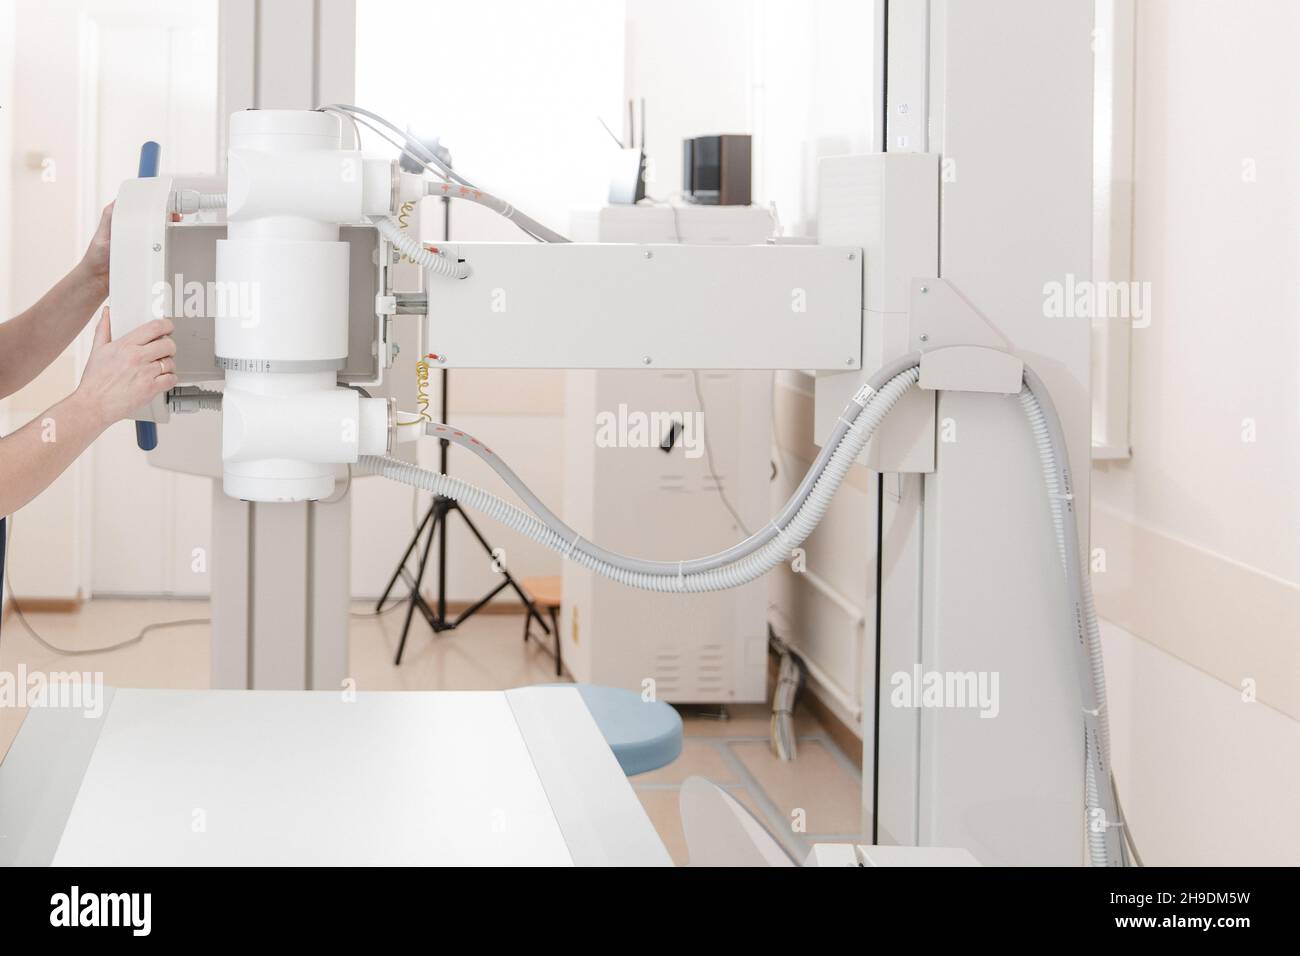 X-ray department in modern hospital. Radiology room with scan machine with empty bed. Technician adjusting an x-ray machine. Scanning chest, heart Stock Photo